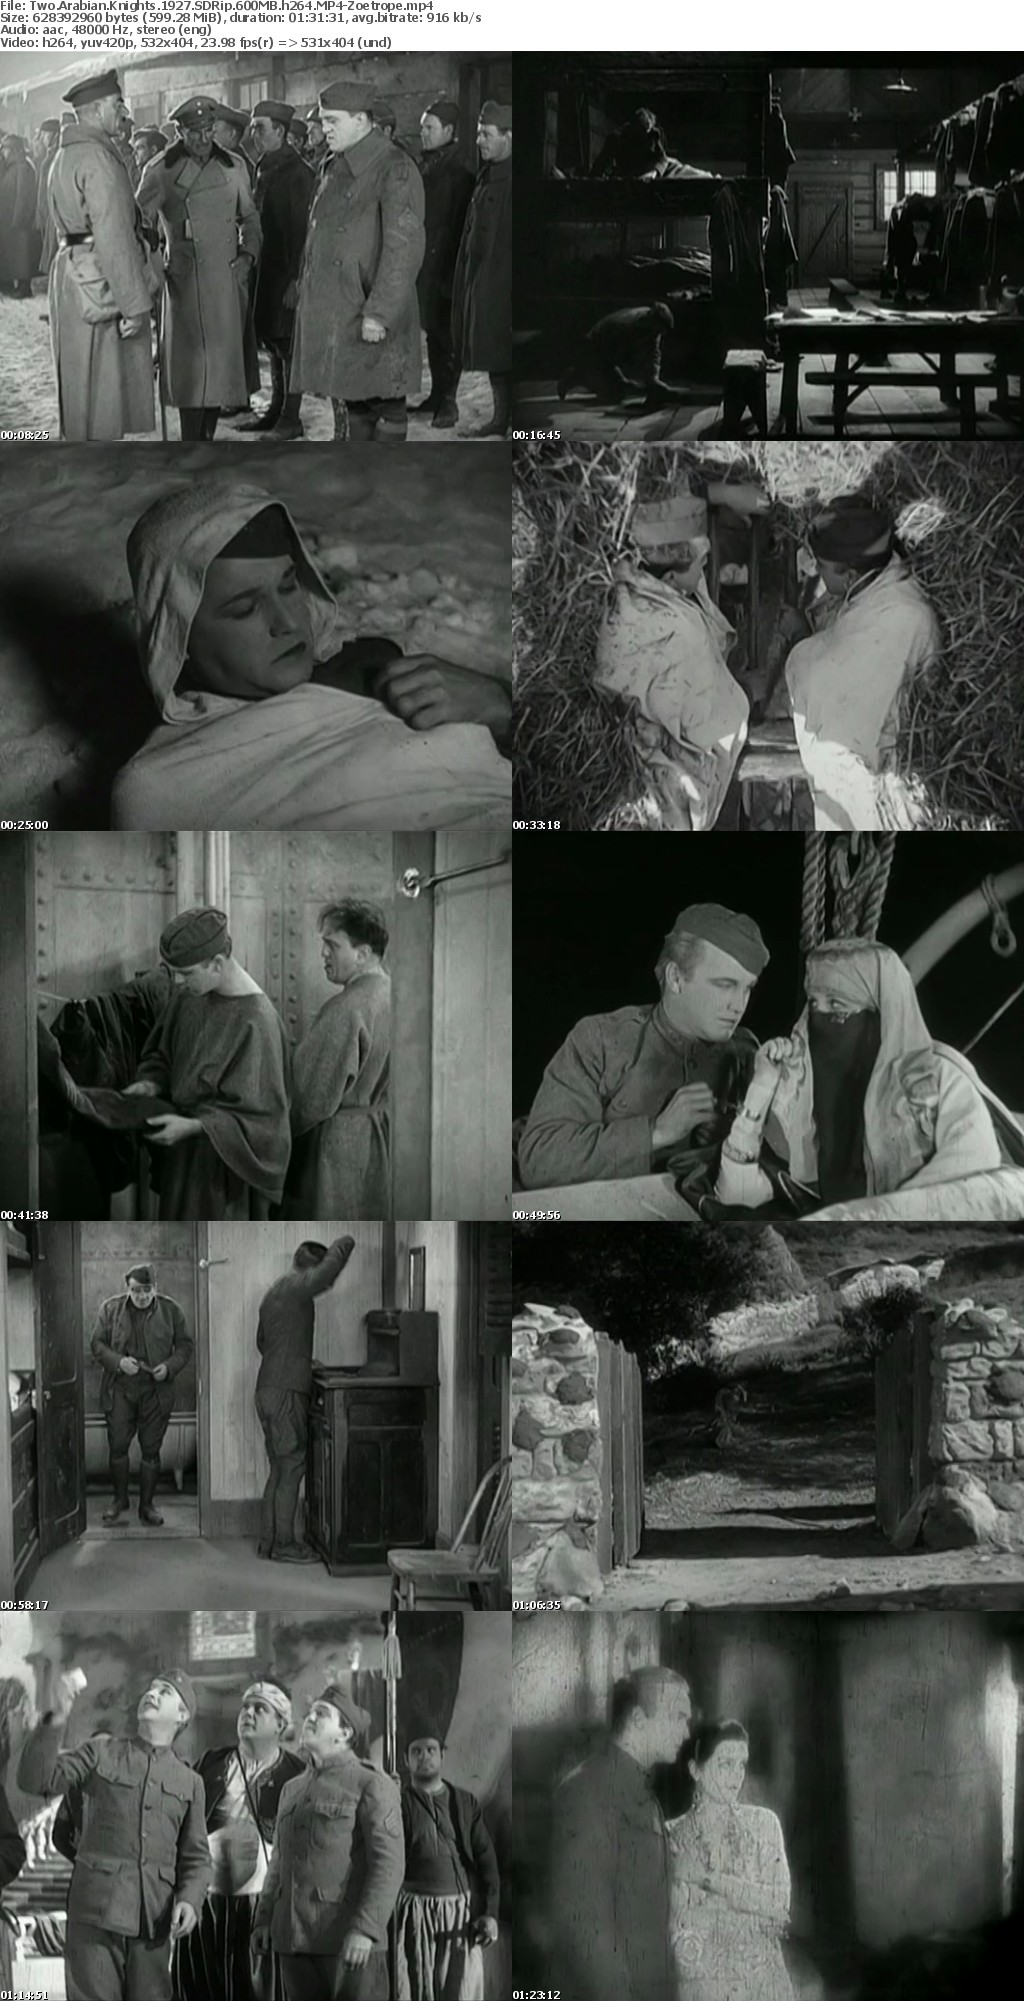 Two Arabian Knights 1927 SDRip 600MB h264 MP4-Zoetrope